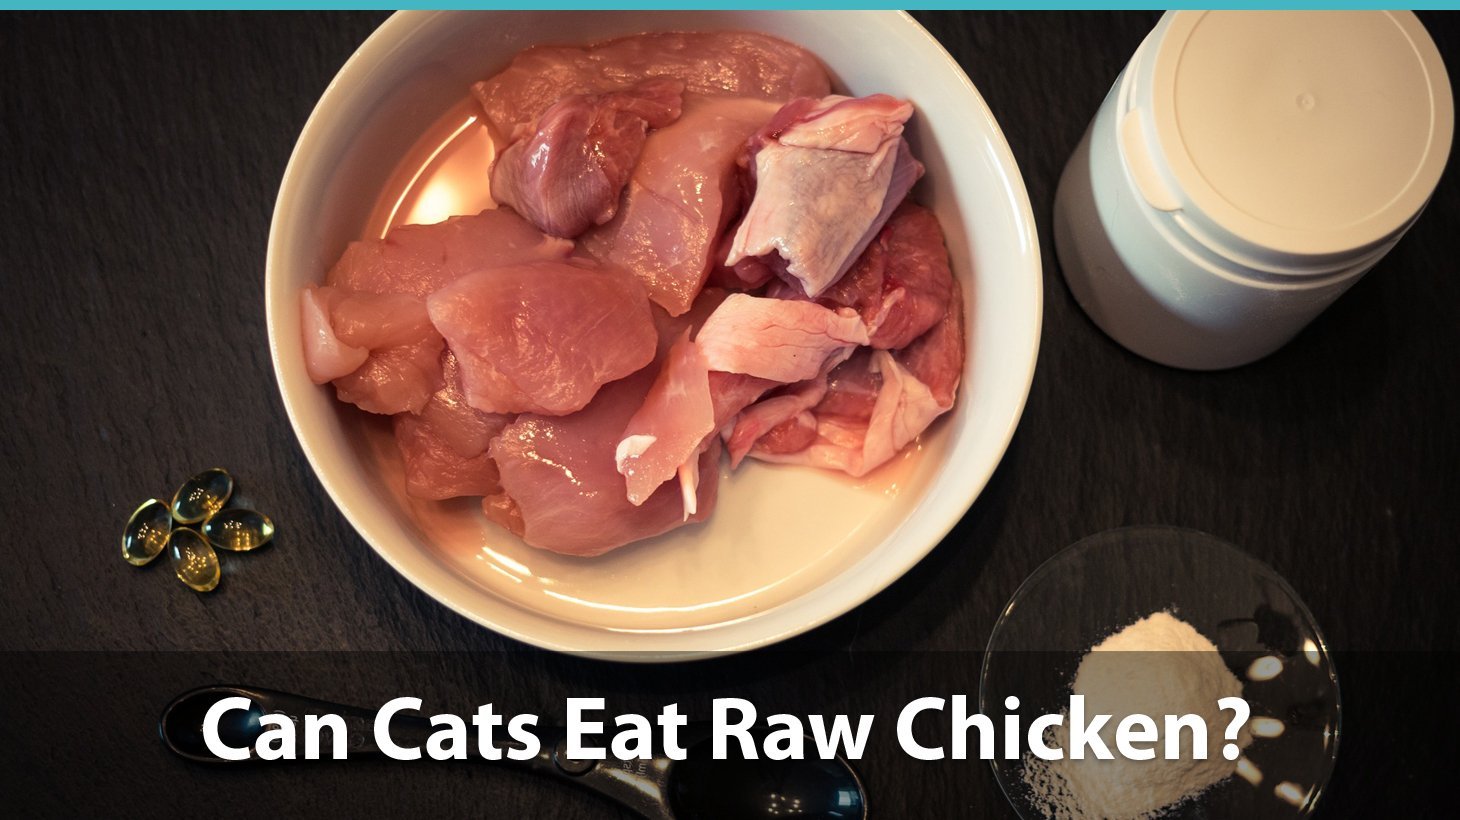 is it safe for cats to eat raw chicken?